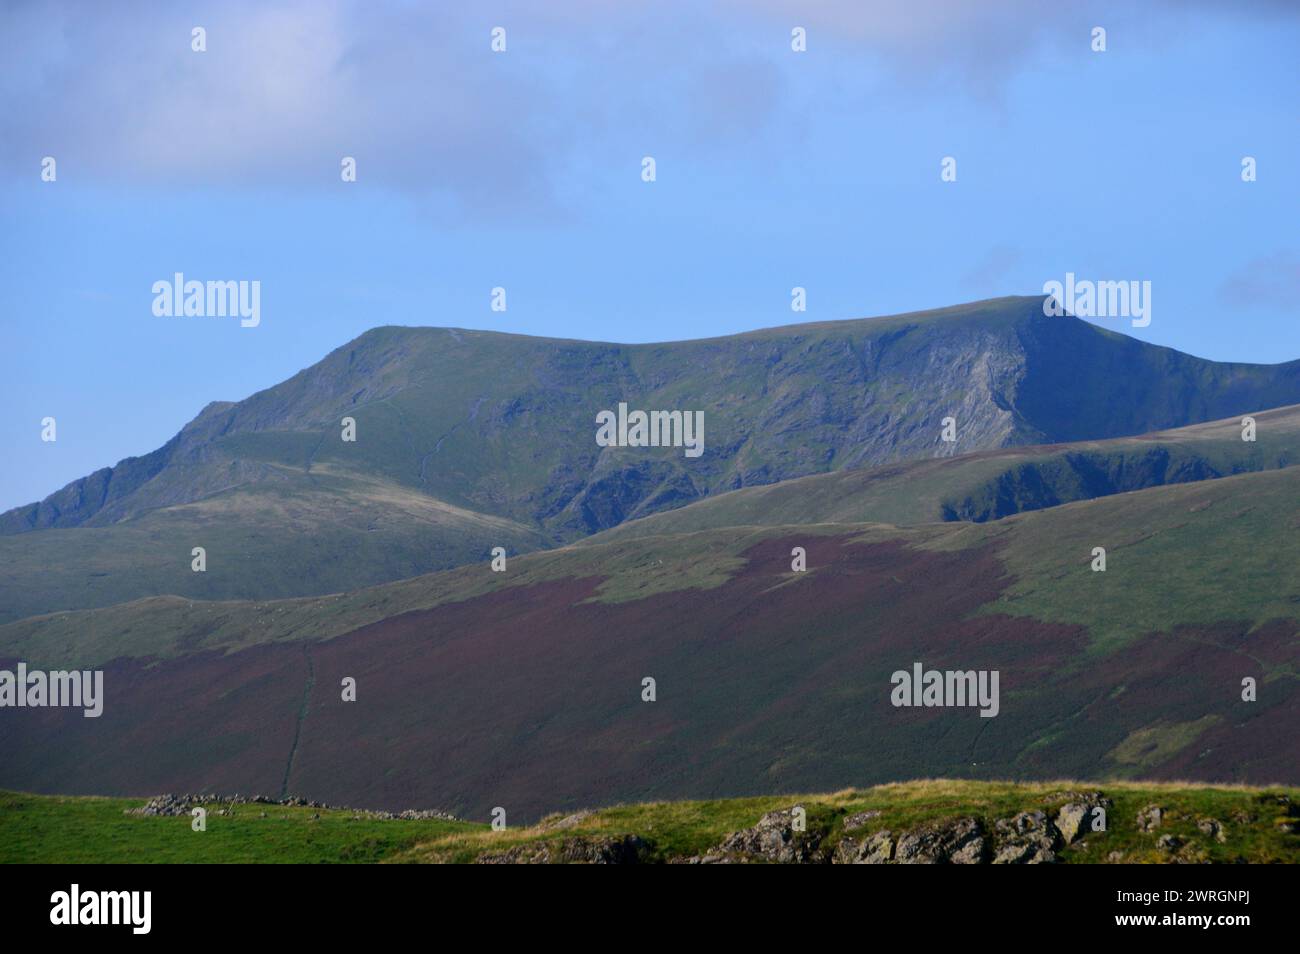 The 'Blencathra' (Saddleback) group of Hills from the Eycott Hills Nature Reserve near Penrith, Lake District National Park, Cumbria, England, UK. Stock Photo